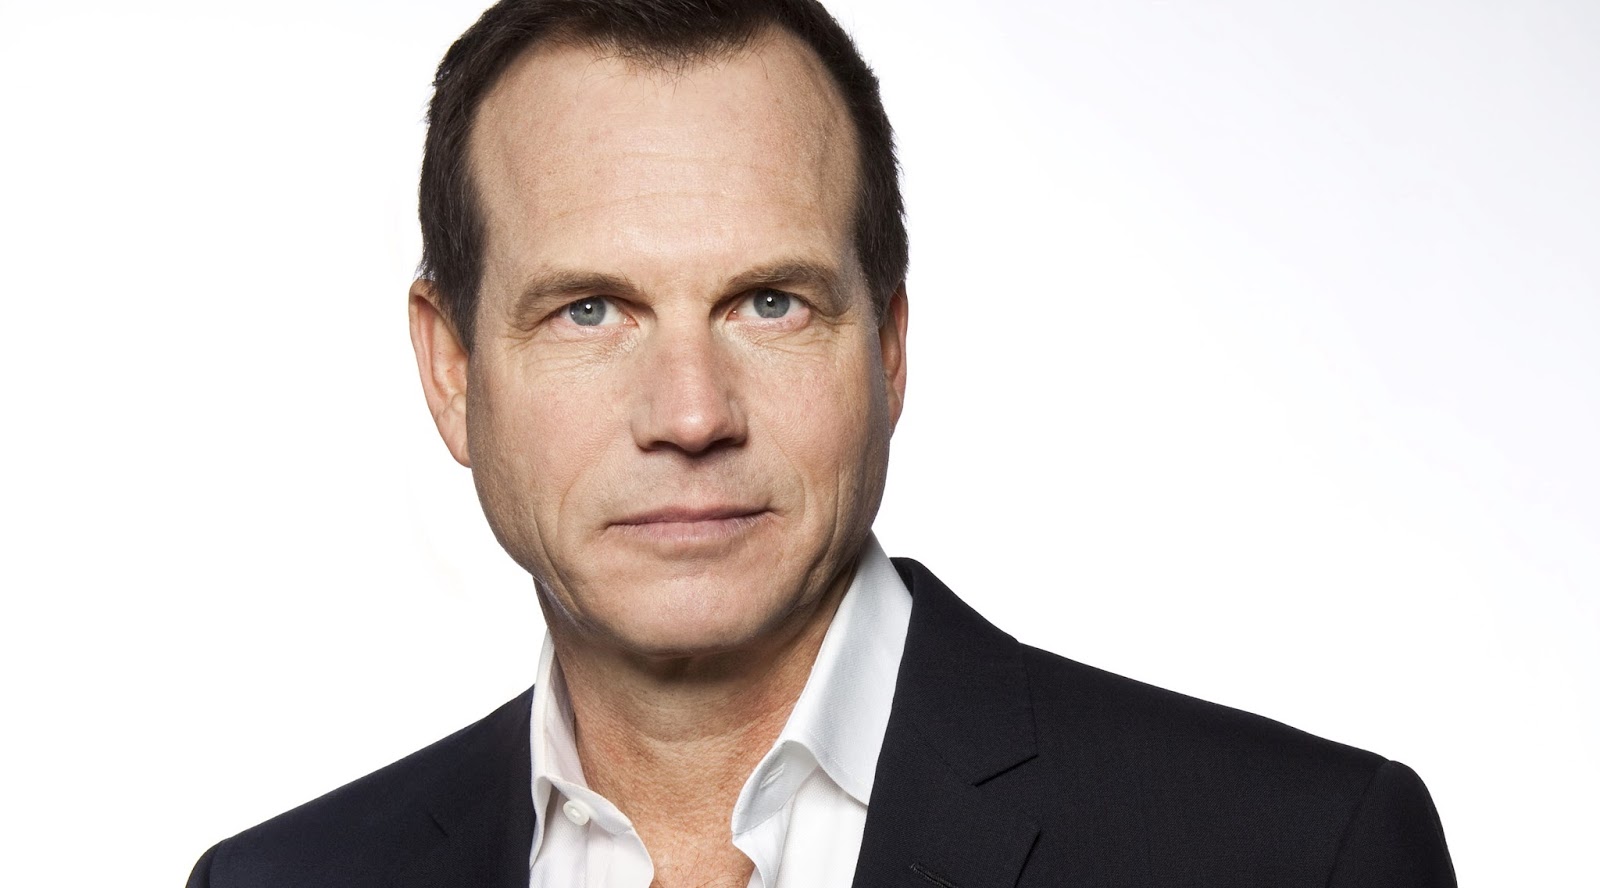 Bill Paxton Biography And Pictures Gallery Oddetorium